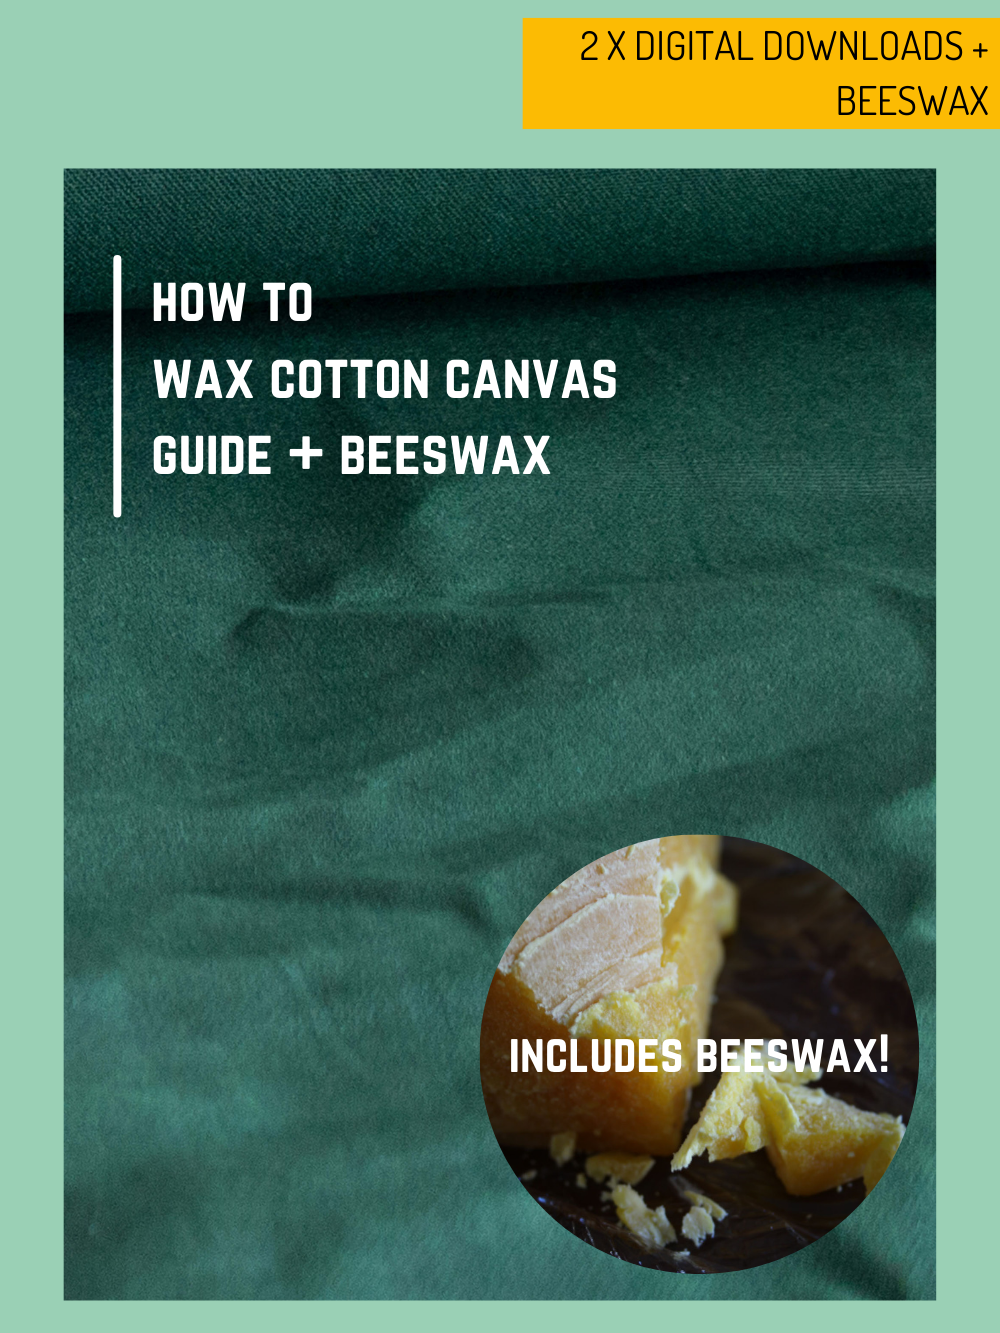 An image of green waxed cotton canvas with a slight crinkle. White text: how to wax cotton canvas guide + beeswax. Small yellow box with black text: 2 x digital downloads + beeswax. Small circle inset image of a bar of beeswax with white text overlay: includes beeswax! All on a sage green background. 